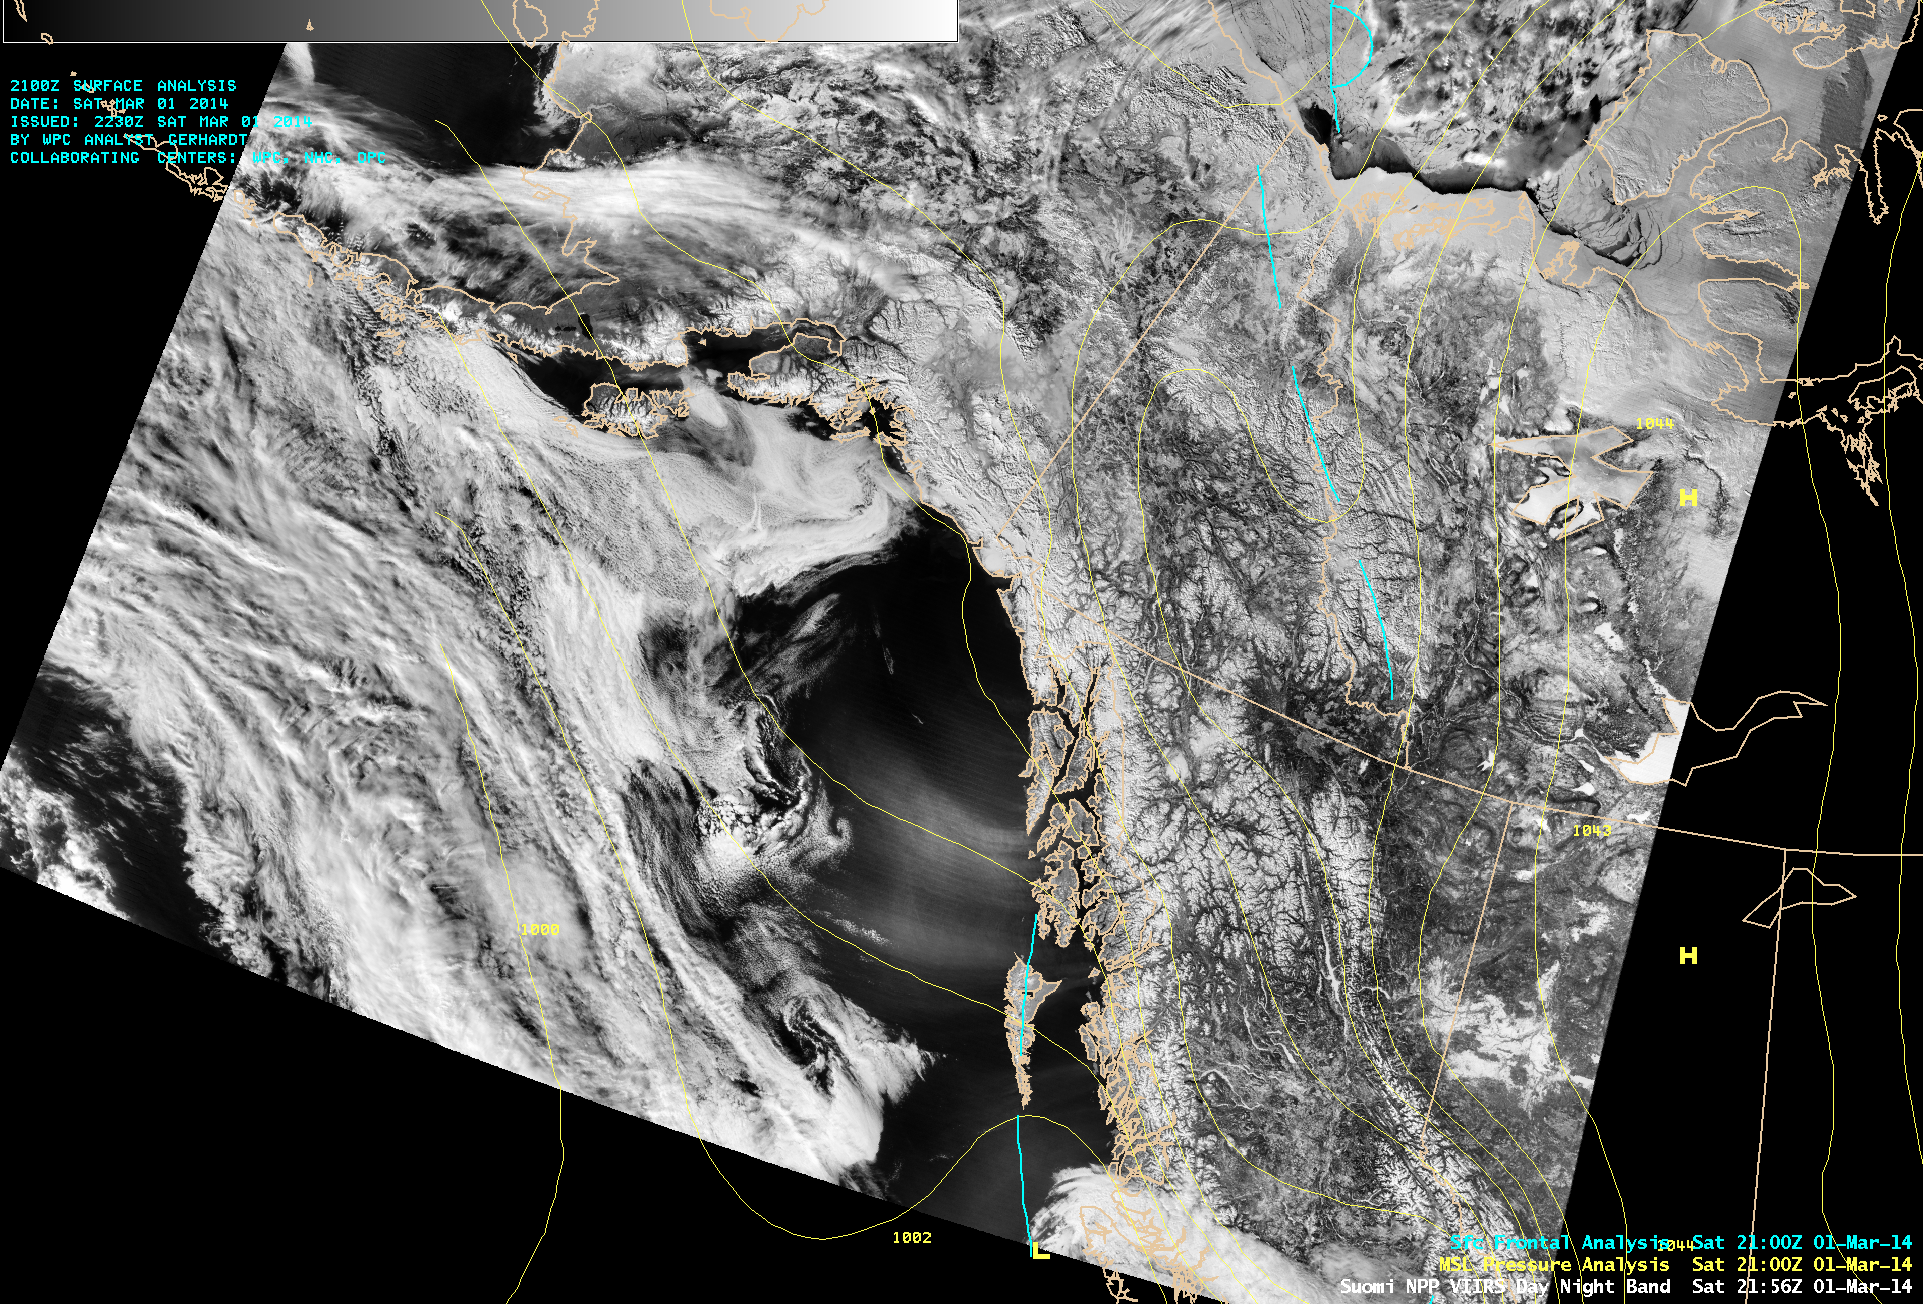 Suomi NPP VIIRS 0.7 Âµm Day/Night Band image with surface pressure and frontal analysis